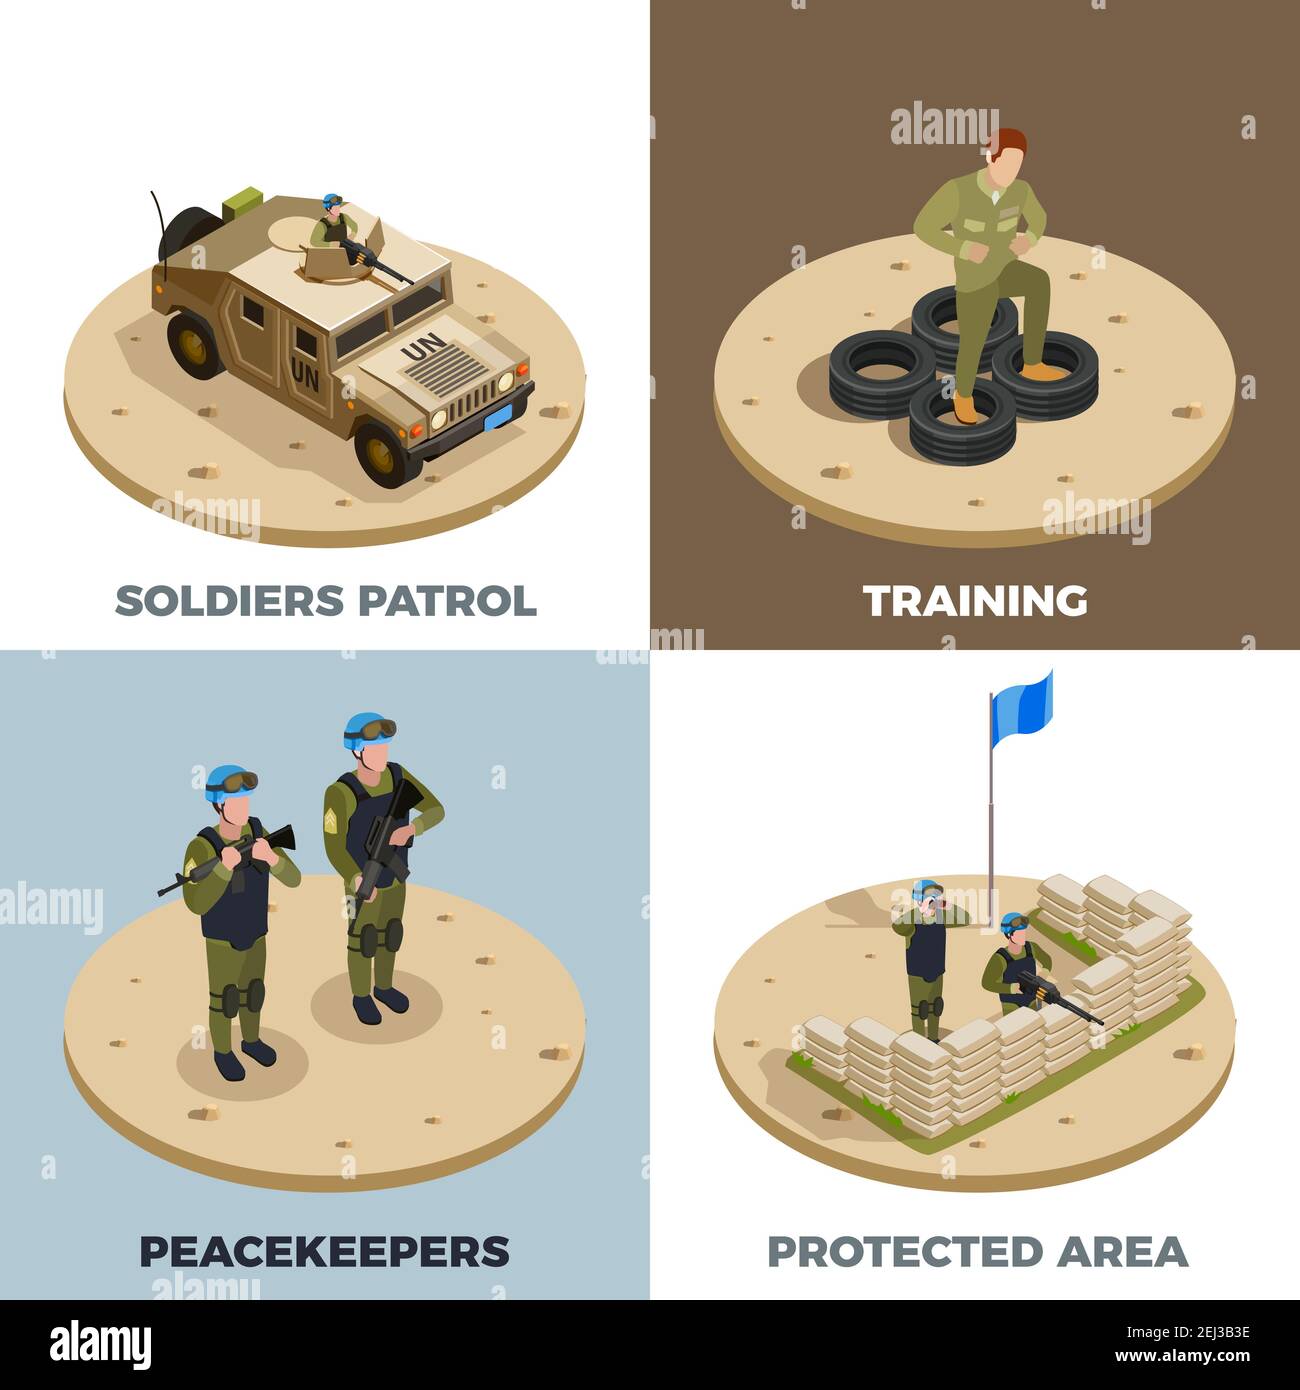 Army military service recruits training front line reinforcement peacekeepers patrol vehicle 4 isometric icons square vector illustration Stock Vector